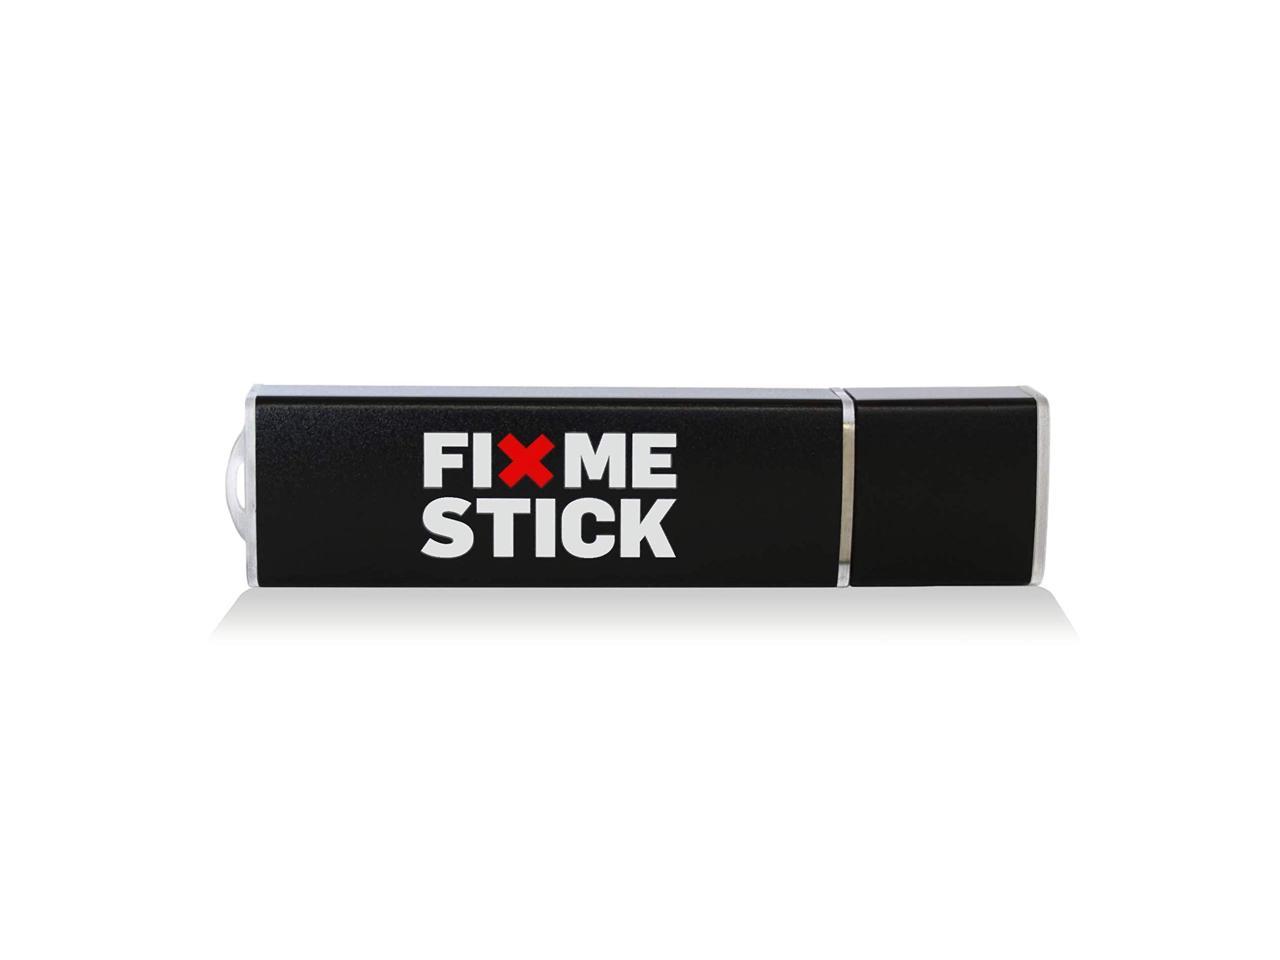 FixMeStick Virus Removal Device - Unlimited Use on up to 5 PCs for